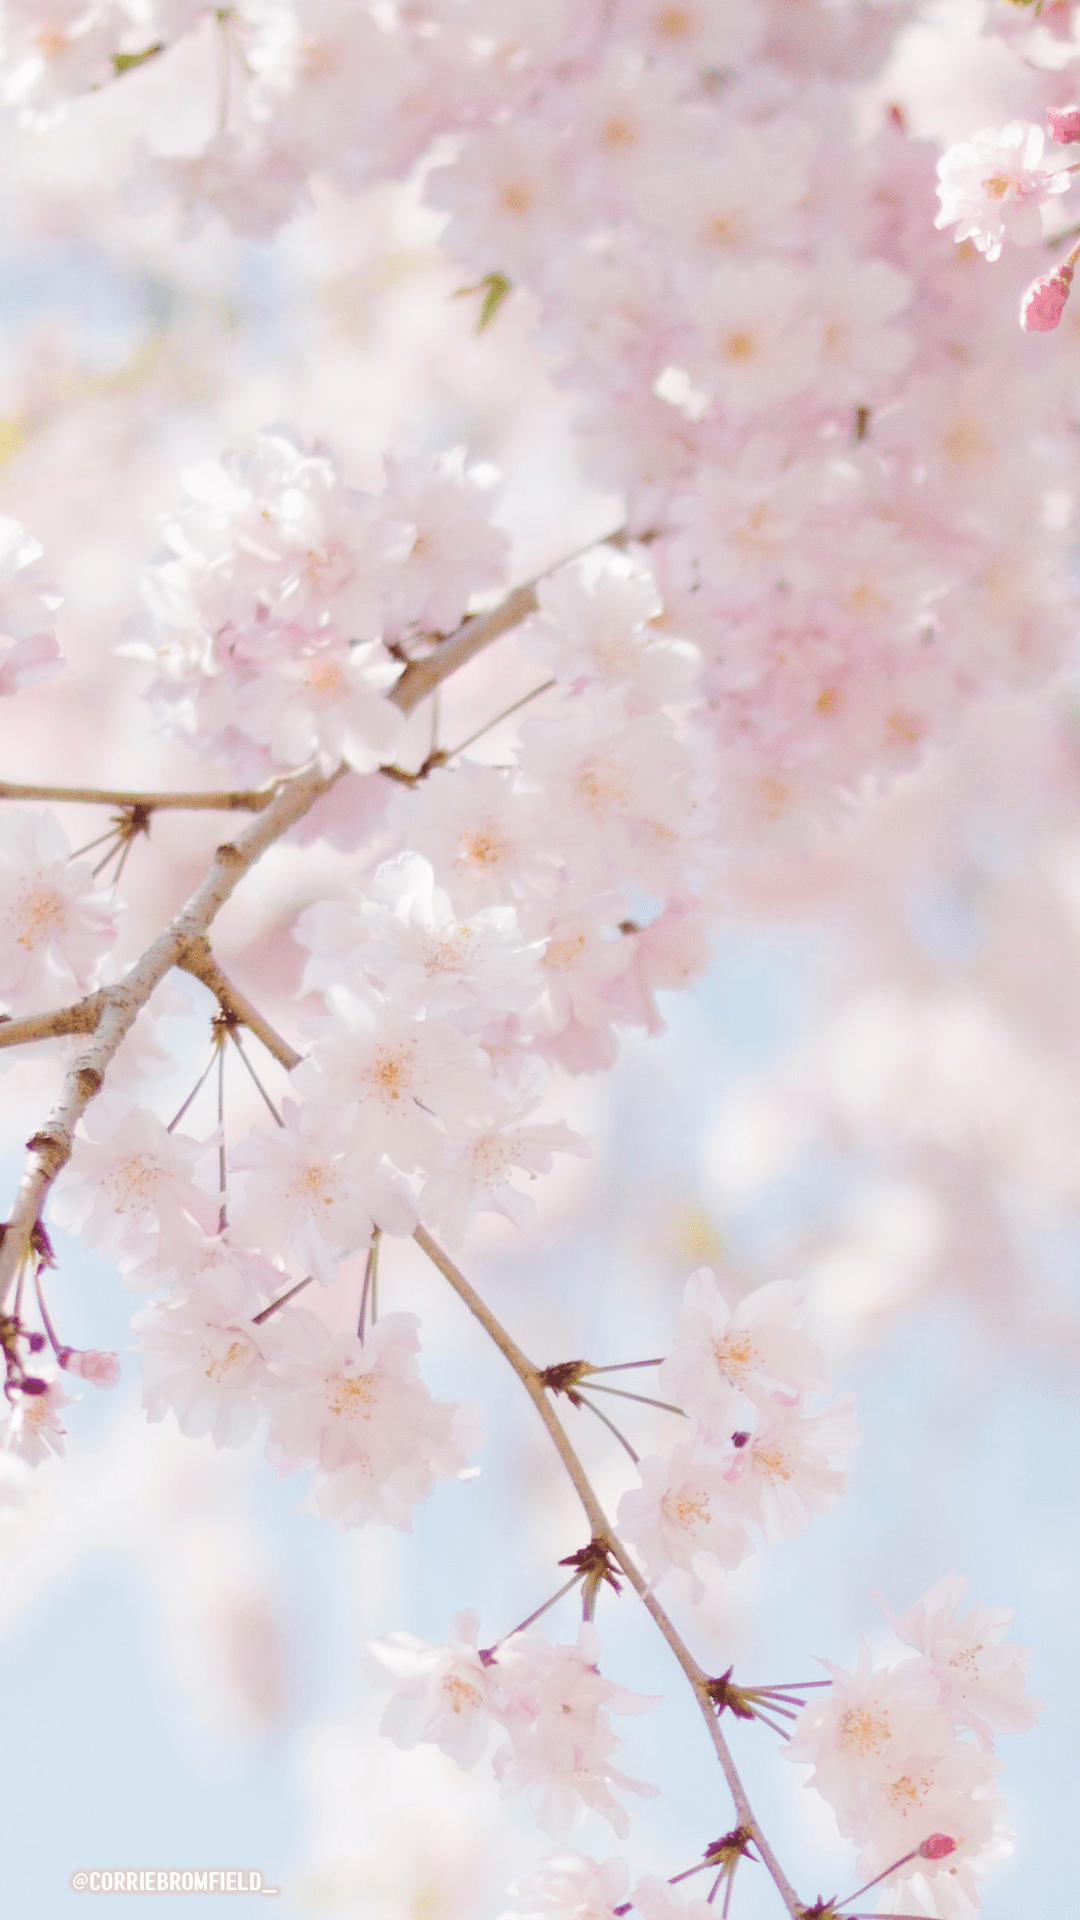 Spring Wallpaper for you to download